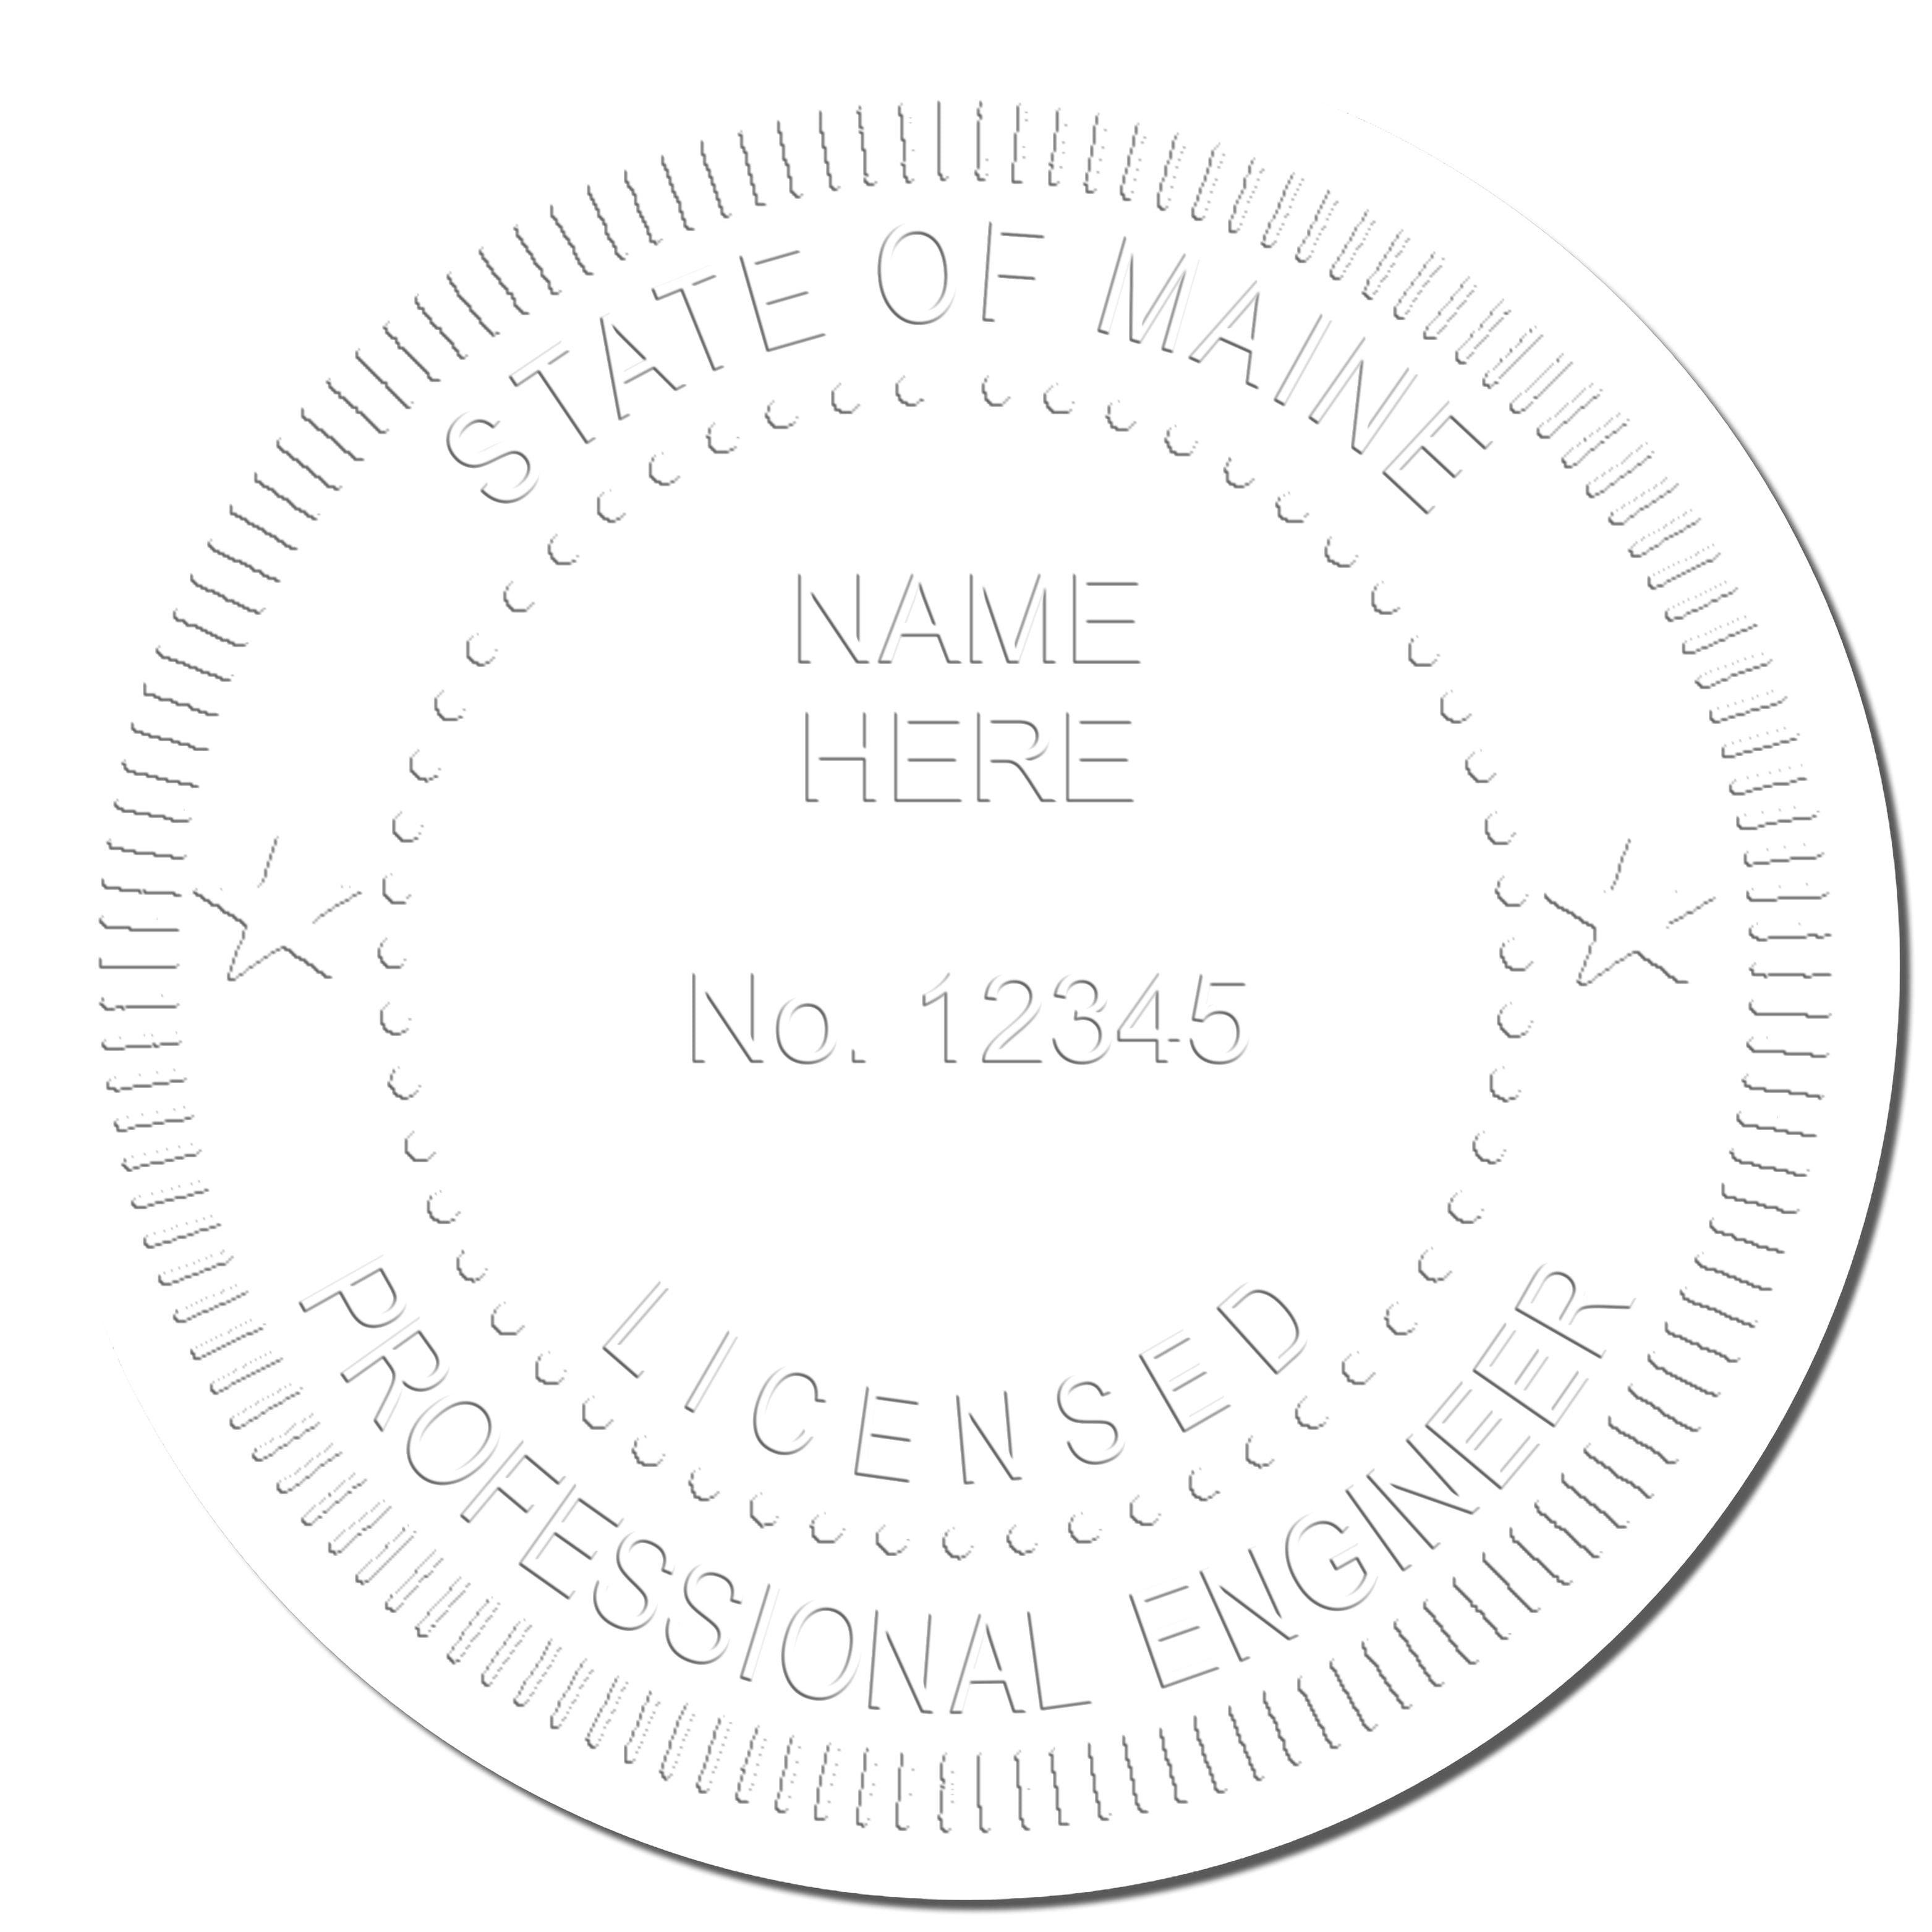 The Long Reach Maine PE Seal stamp impression comes to life with a crisp, detailed photo on paper - showcasing true professional quality.